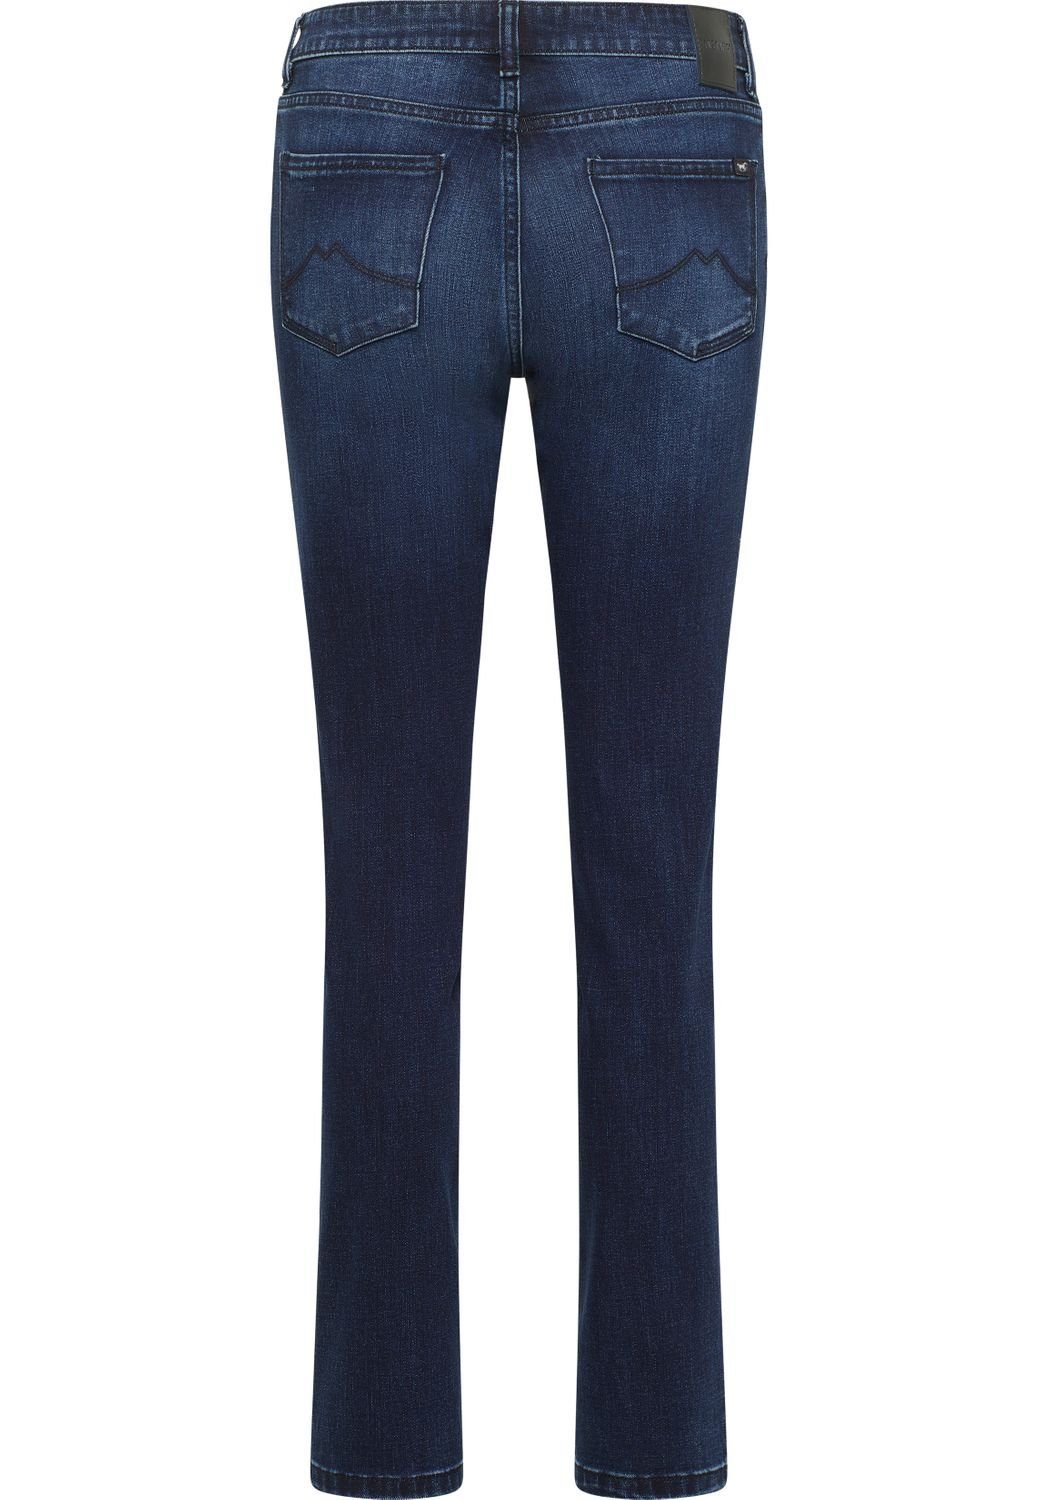 MUSTANG Relax-fit-Jeans CROSBY mit Stretch